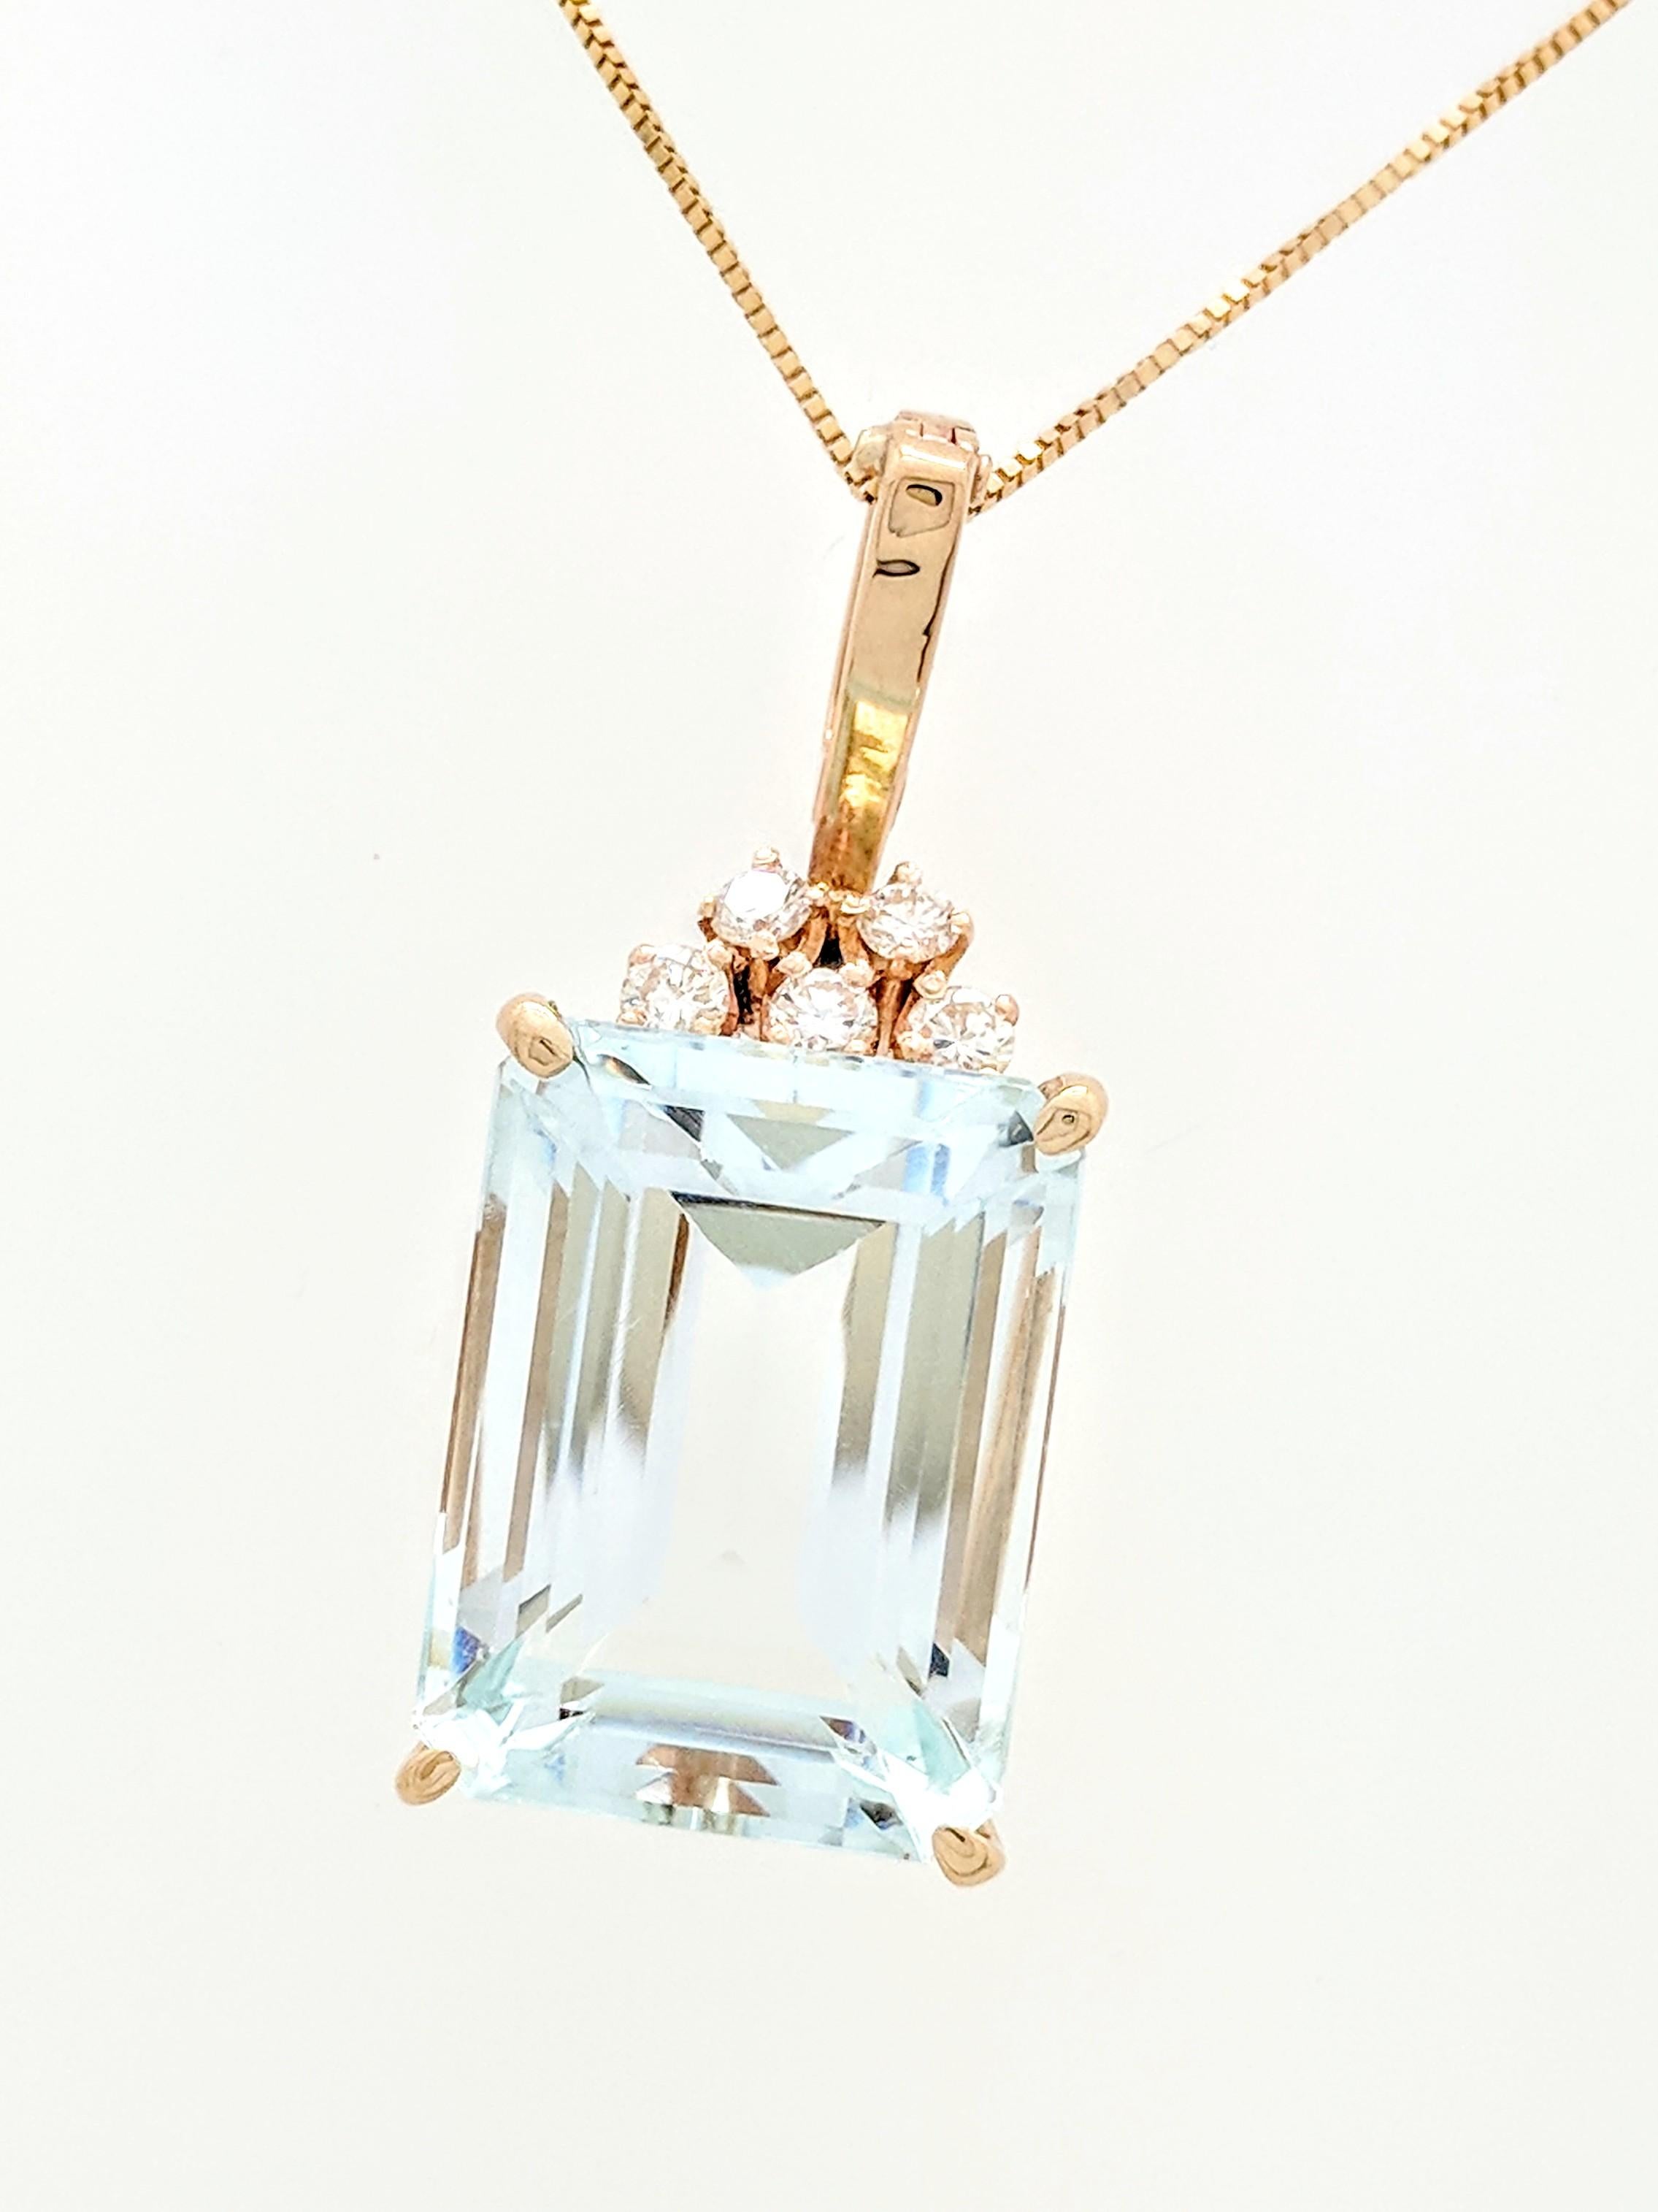 You are viewing a beautiful aquamarine & diamond pendant necklace. This necklace is crafted from 14k yellow gold and weighs 12.2 grams. The pendant features (1) 21ct natural emerald cut aquamarine and (5) .10ct round natural brilliant cut diamonds.